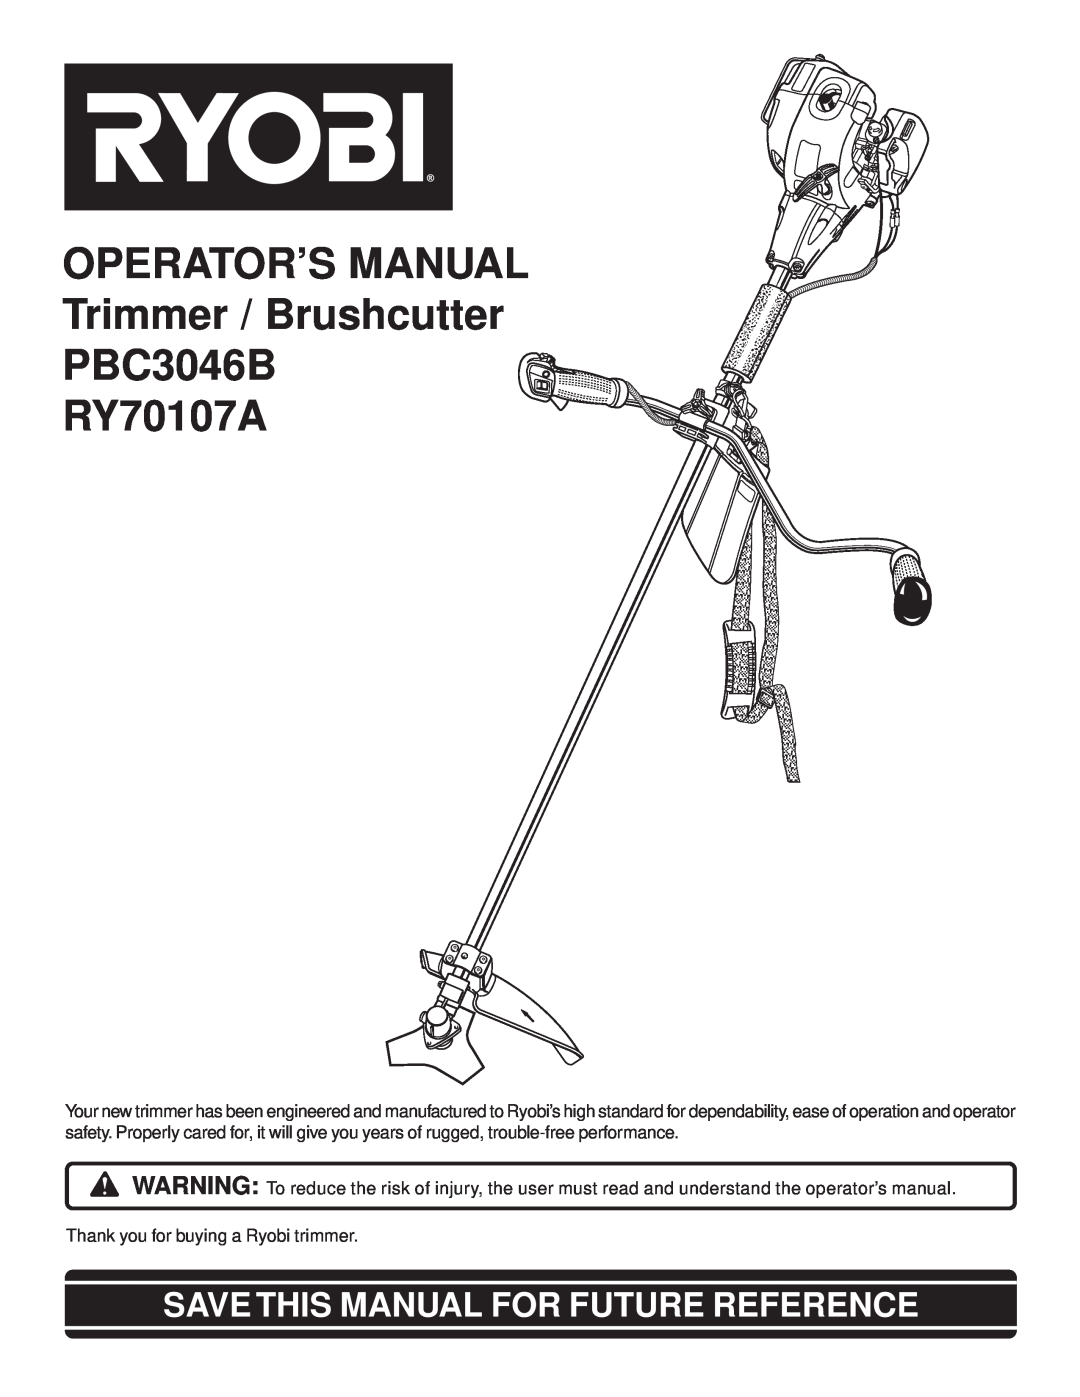 Ryobi Outdoor manual OPERATOR’S MANUAL Trimmer / Brushcutter PBC3046B RY70107A, Save This Manual For Future Reference 